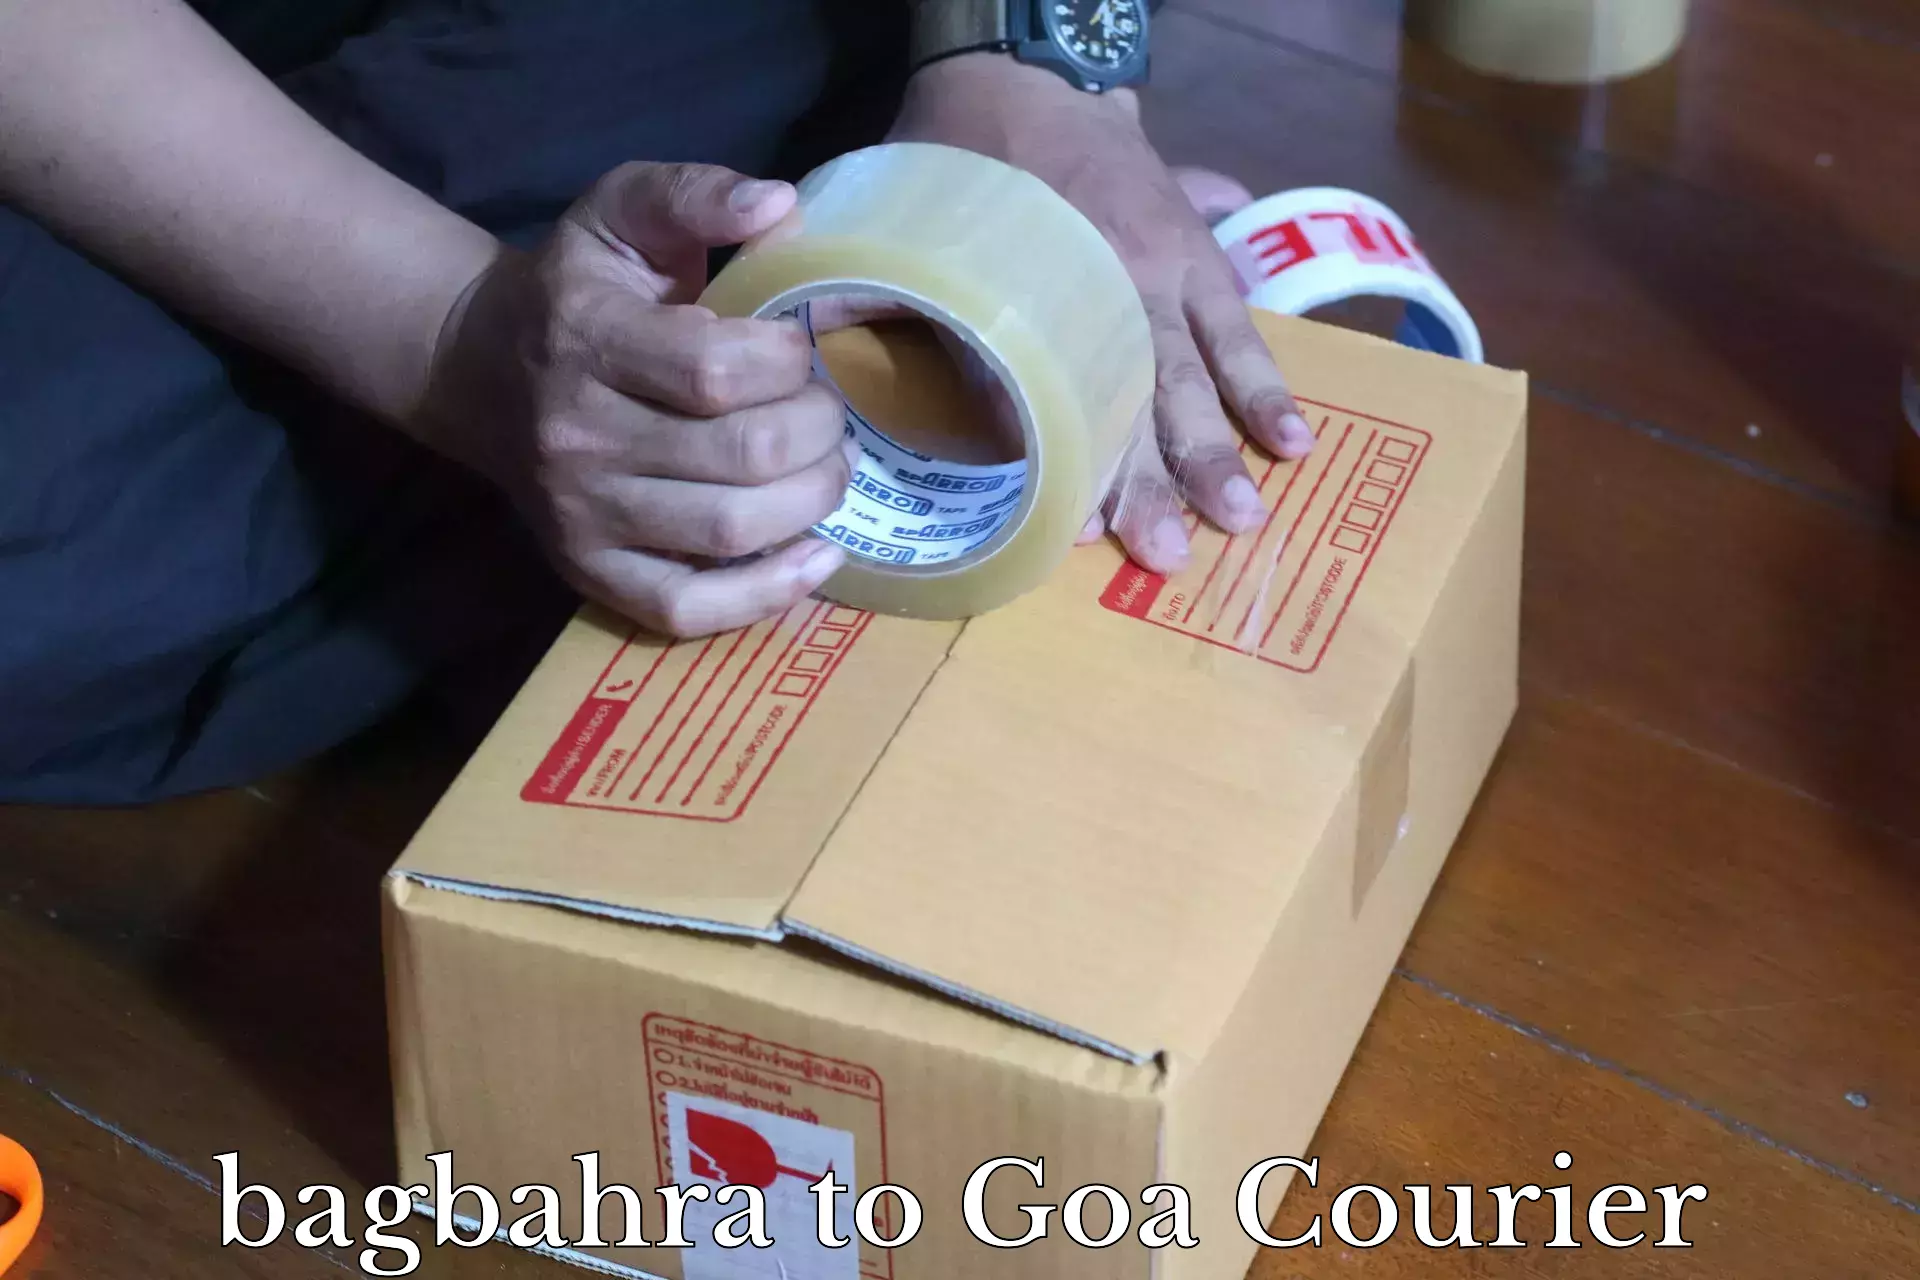 International shipping in bagbahra to South Goa